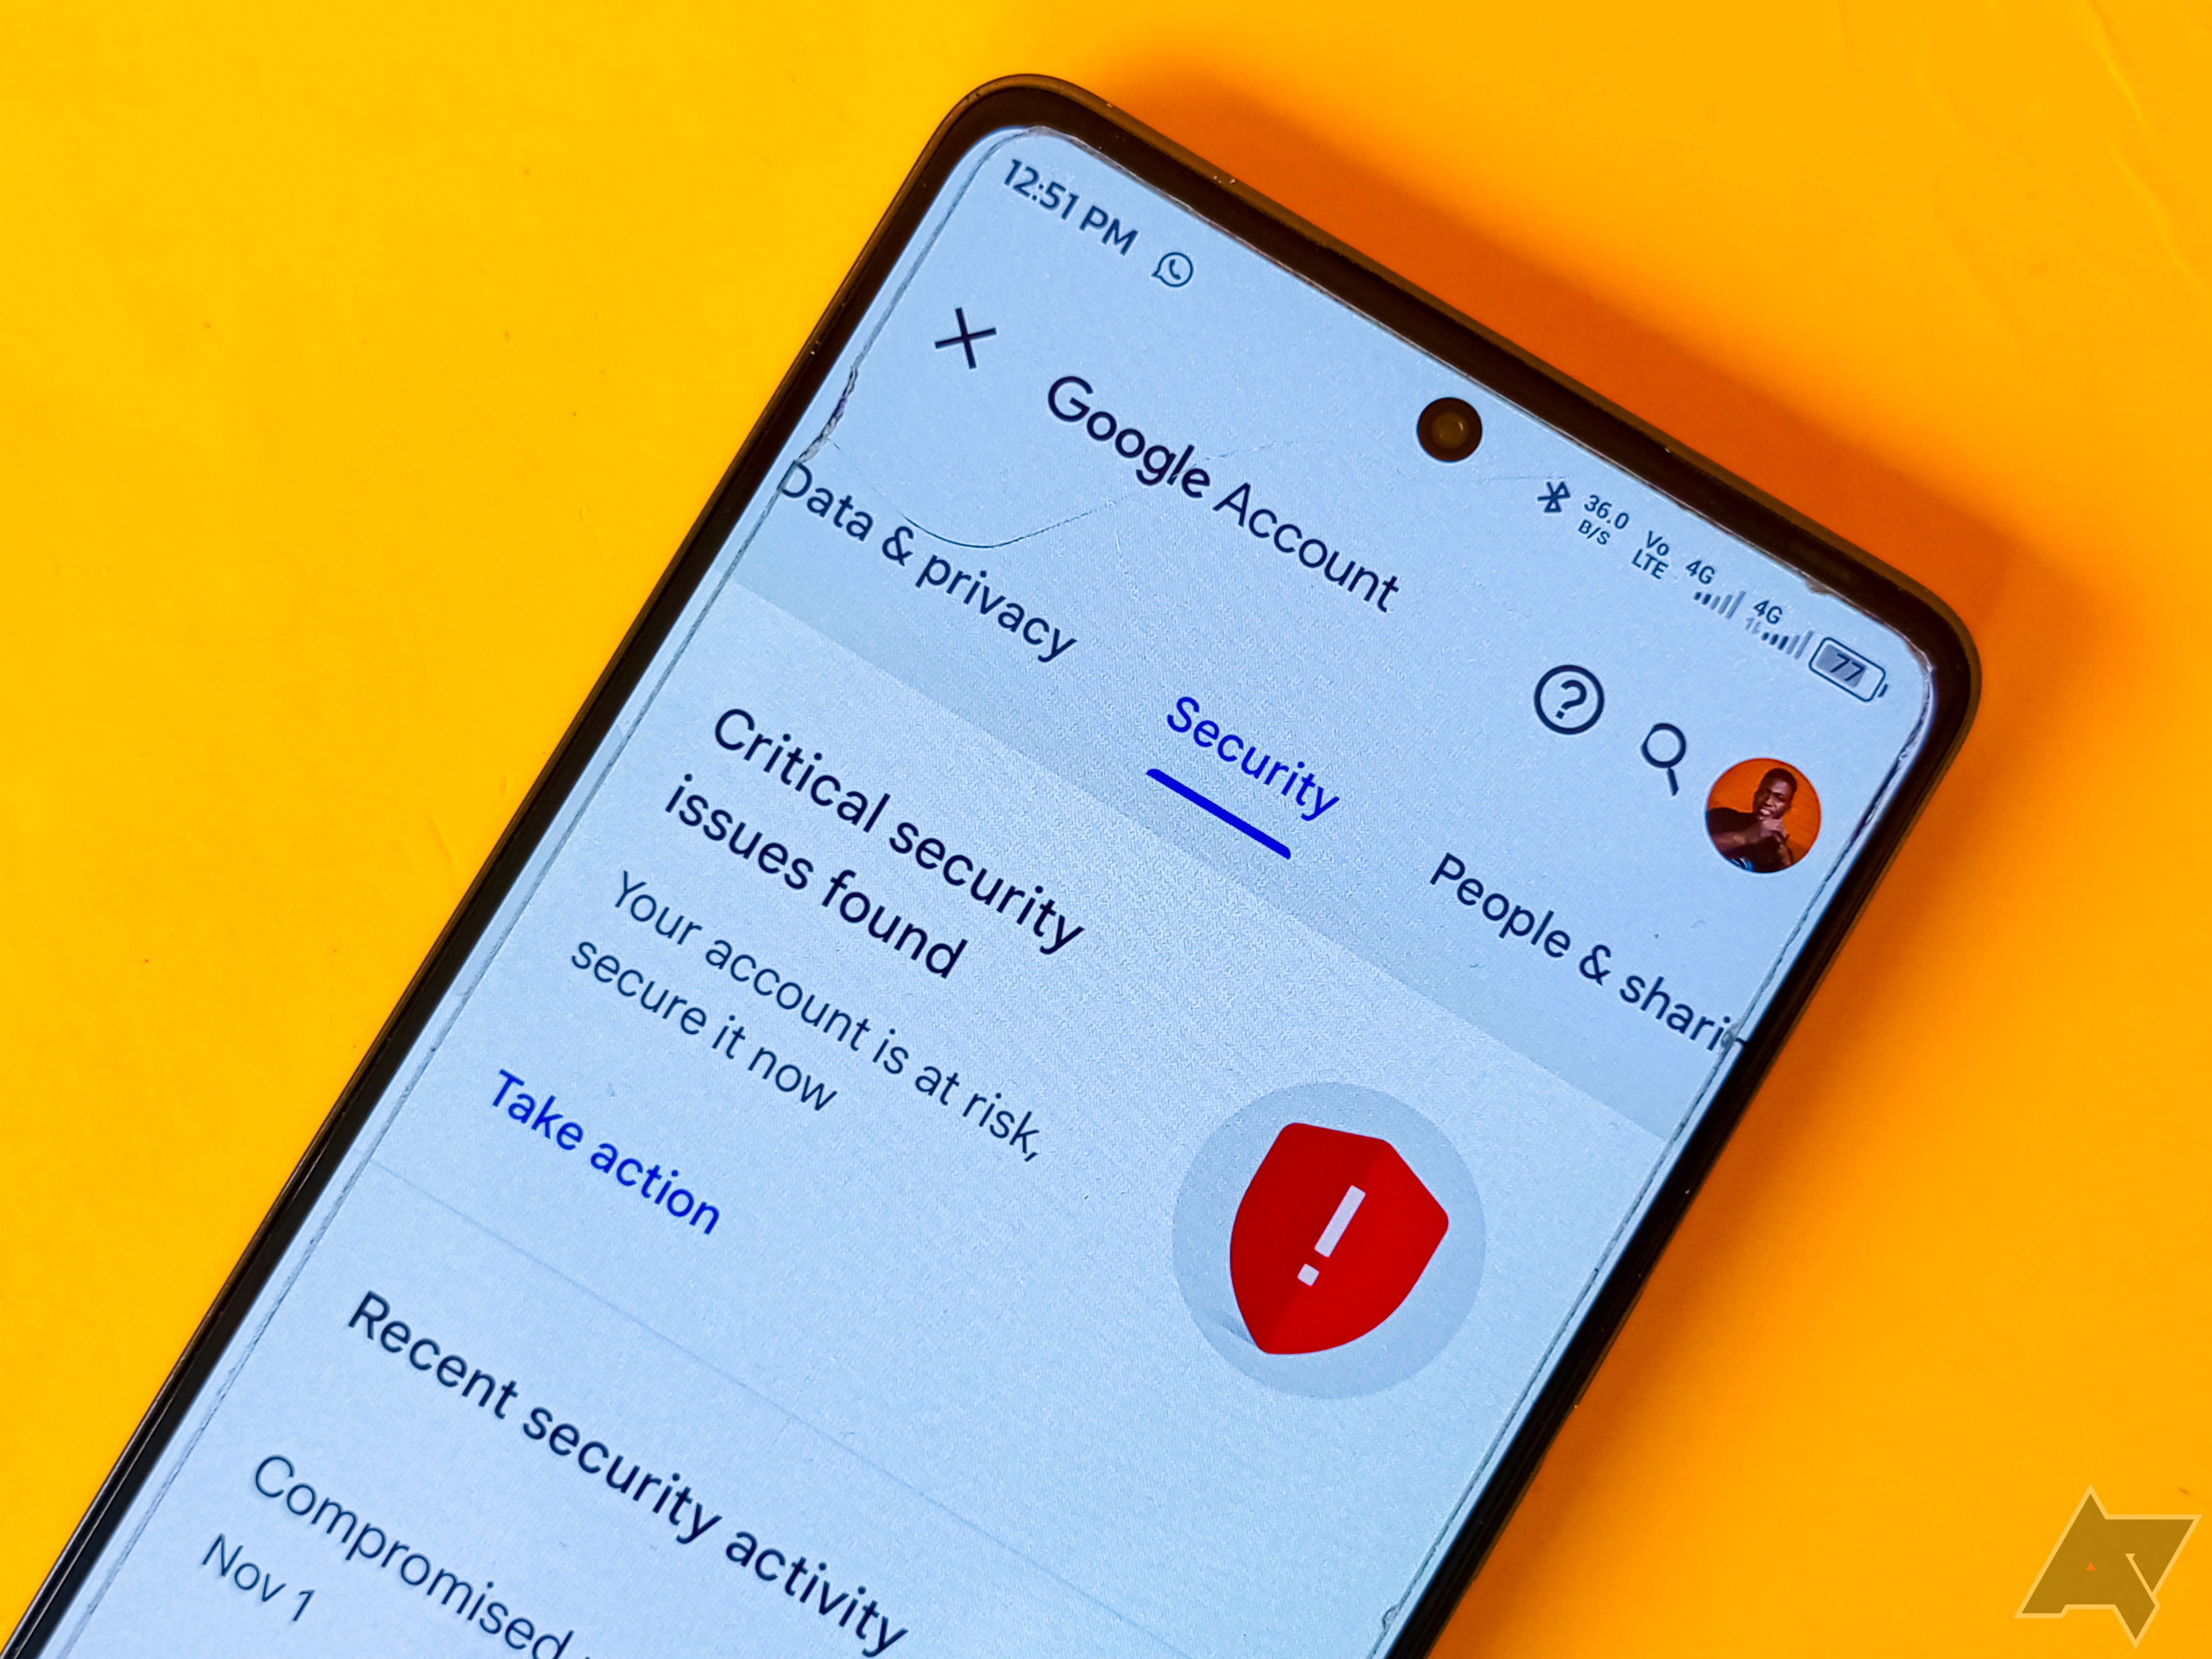 The Google account security settings screen captured on a phone placed on a yellow background. 